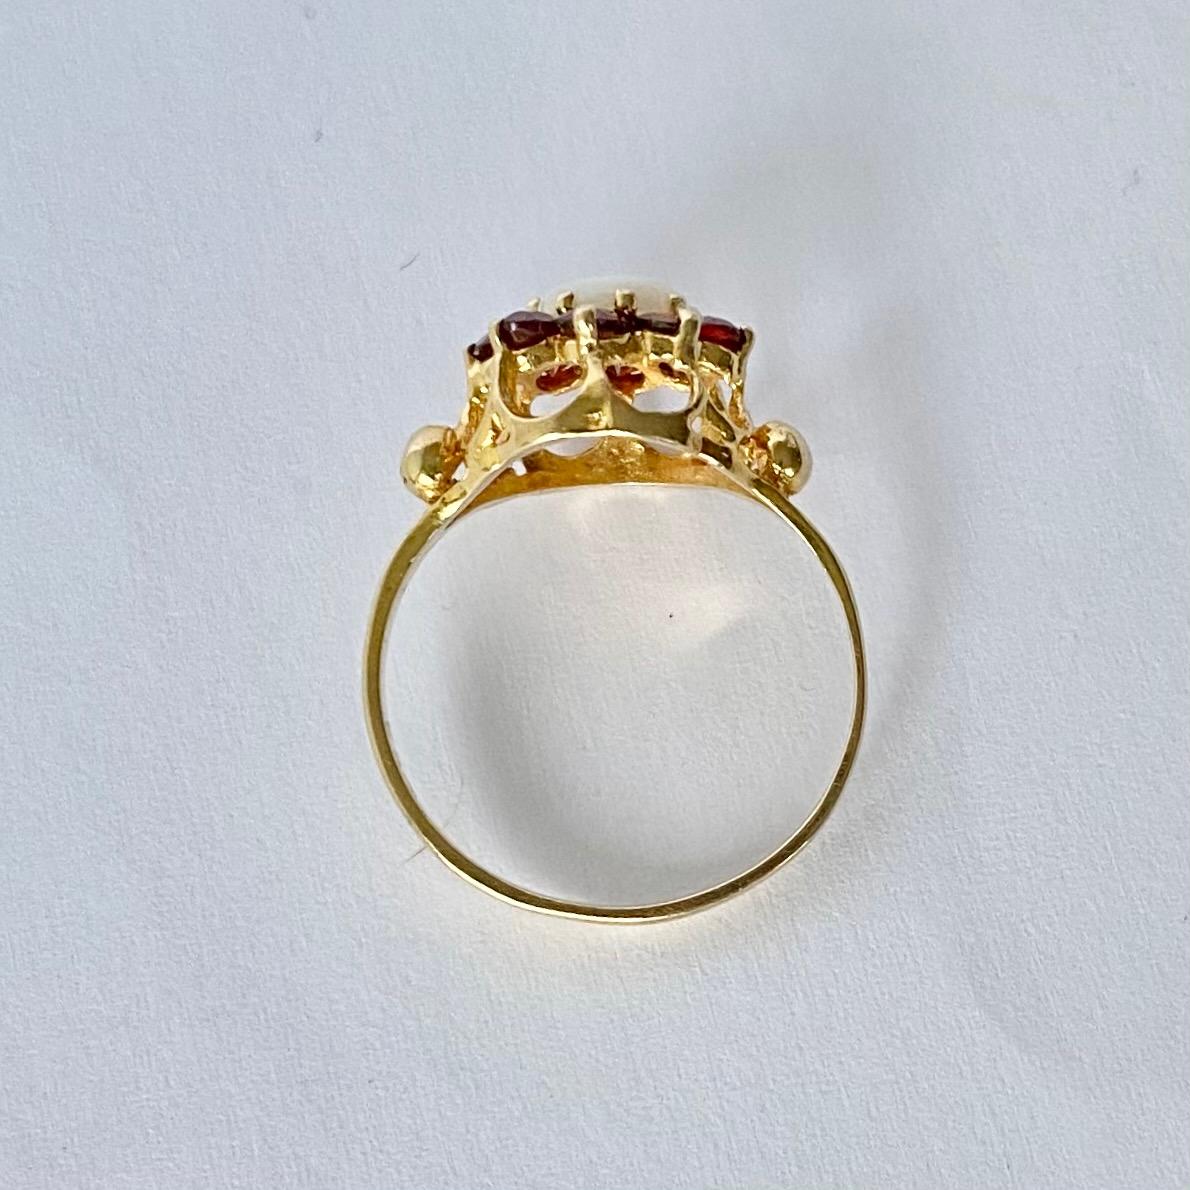 This striking ring holds round cut garnets totalling approx 60pts and a shimmering opal at the centre. All the stones sit in open 9carat gold claws. 

Ring Size: N or 6 3/4 
Cluster Diameter: 11mm
Height Off Finger: 7mm

Weight: 1.8g